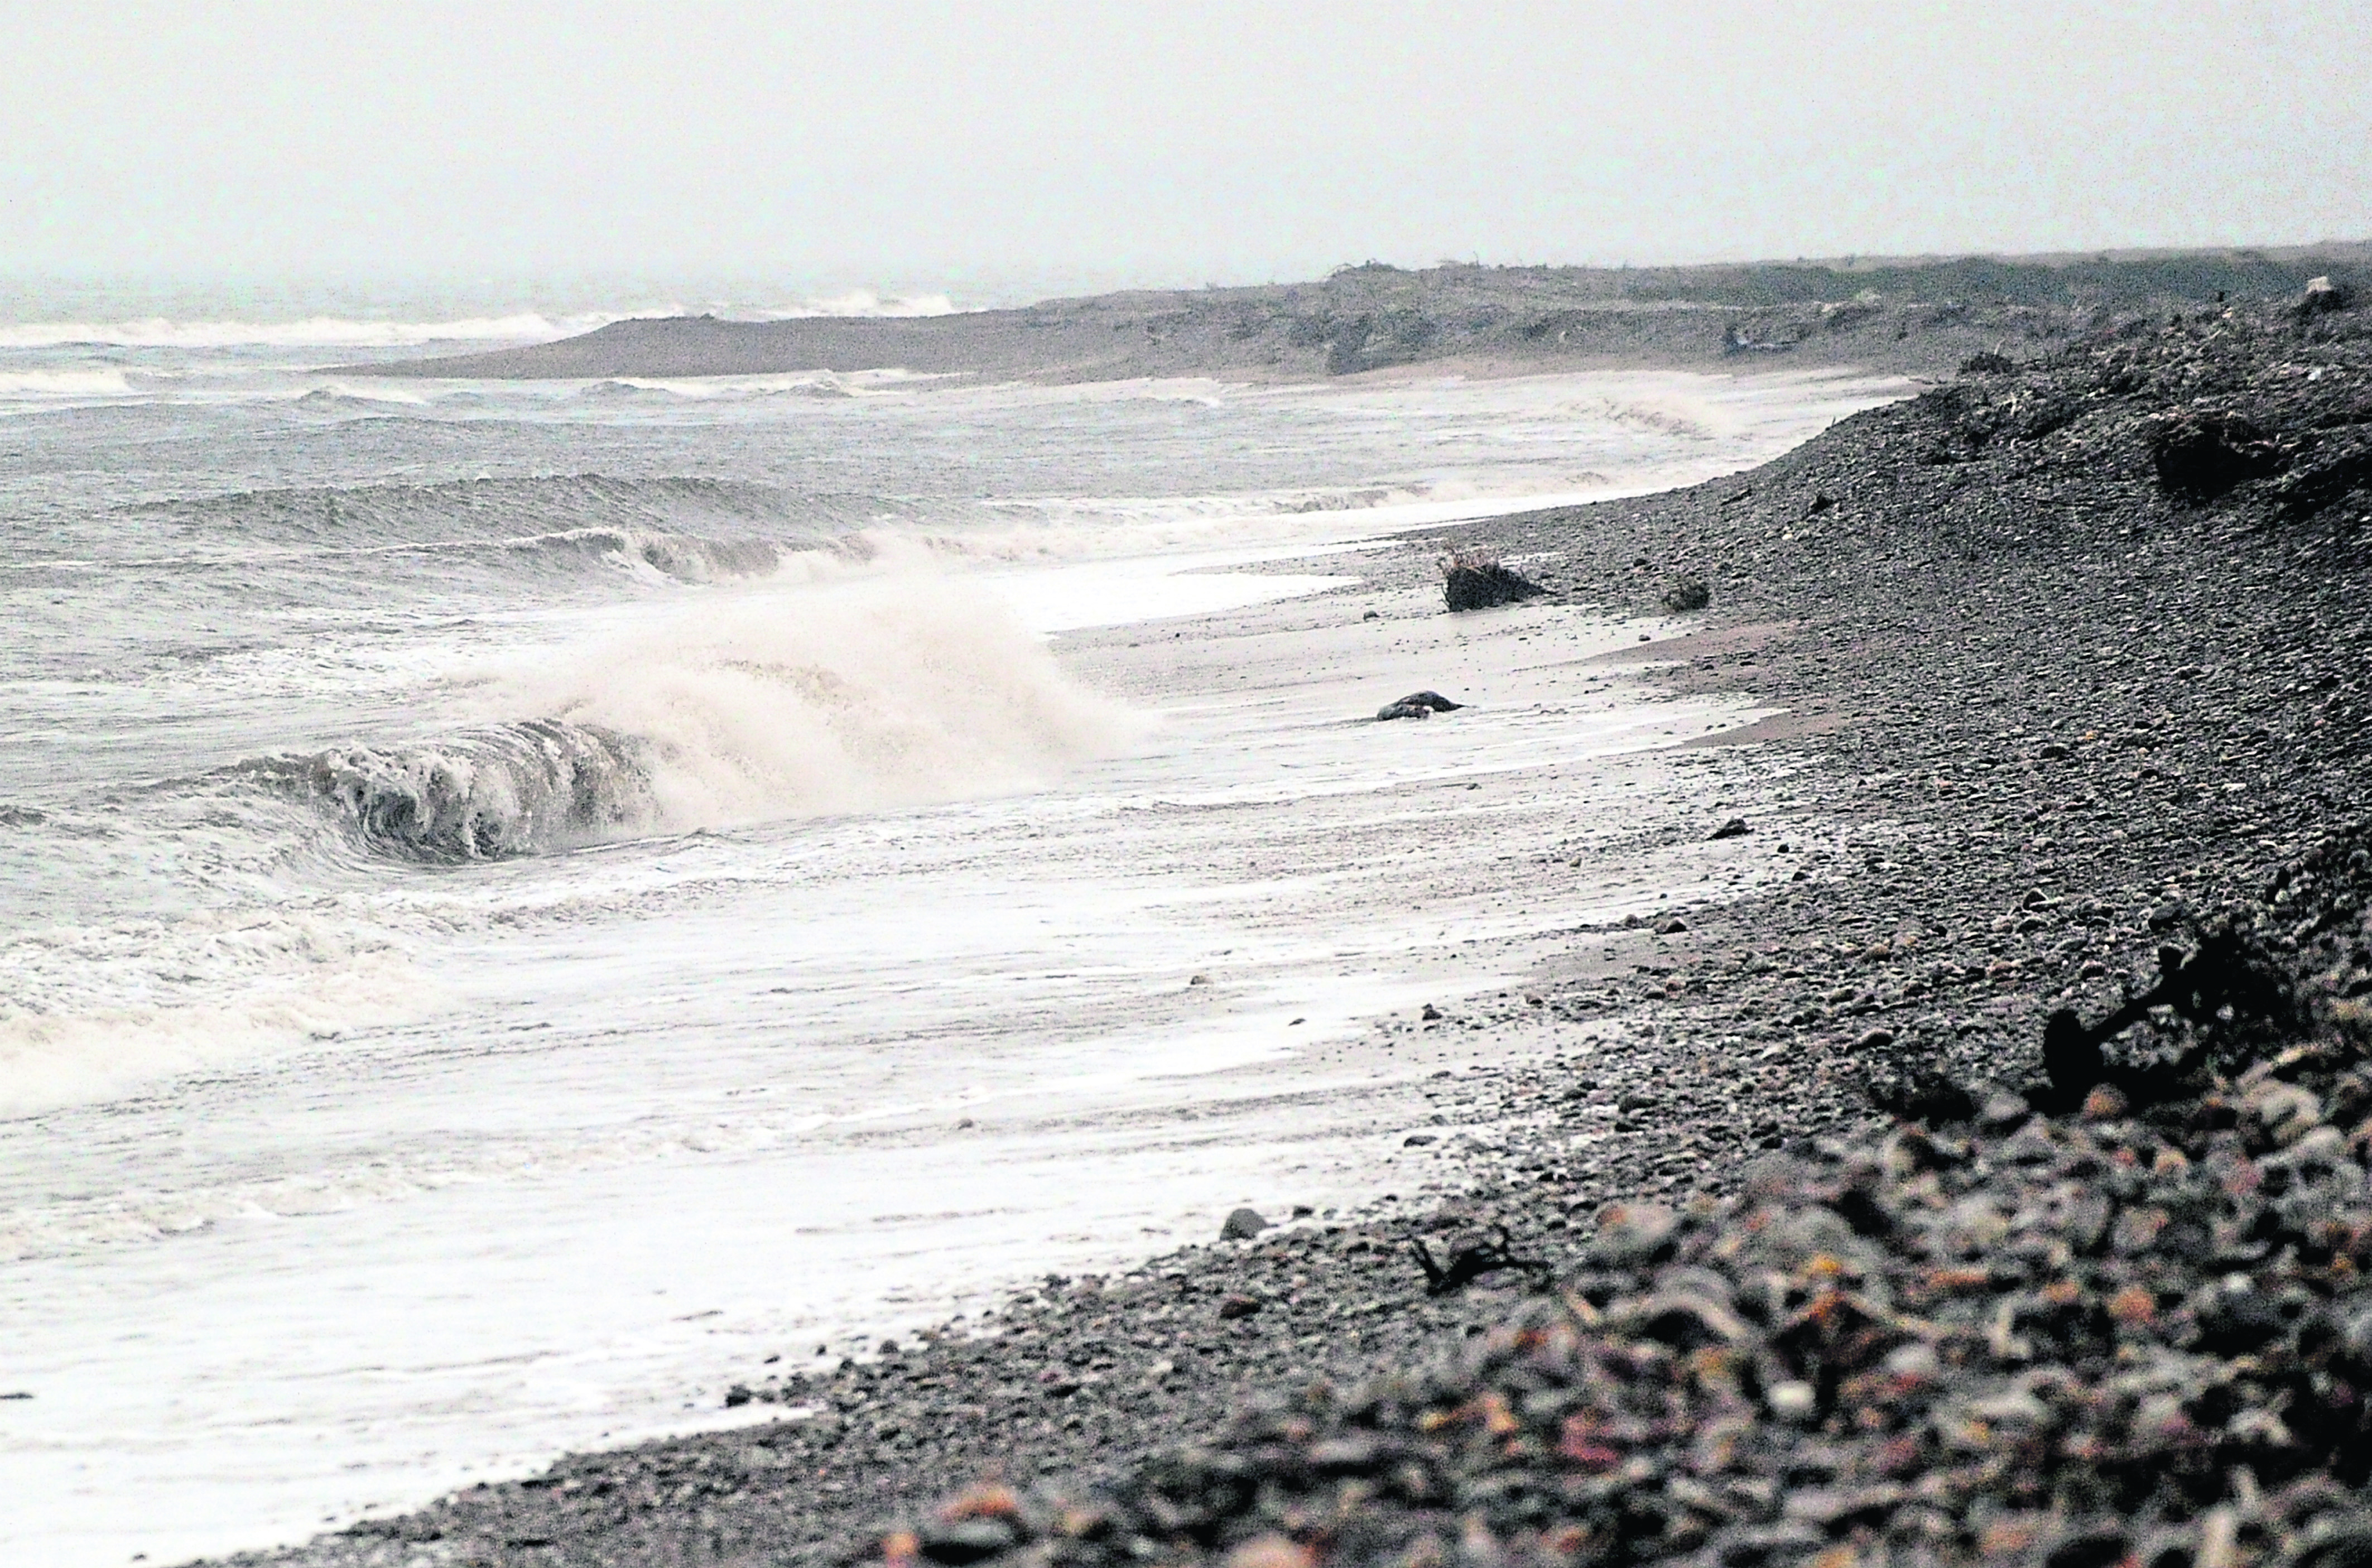 The shingle beach at Kingston On Spey being battered by waves.

Picture by Gordon Lennox.